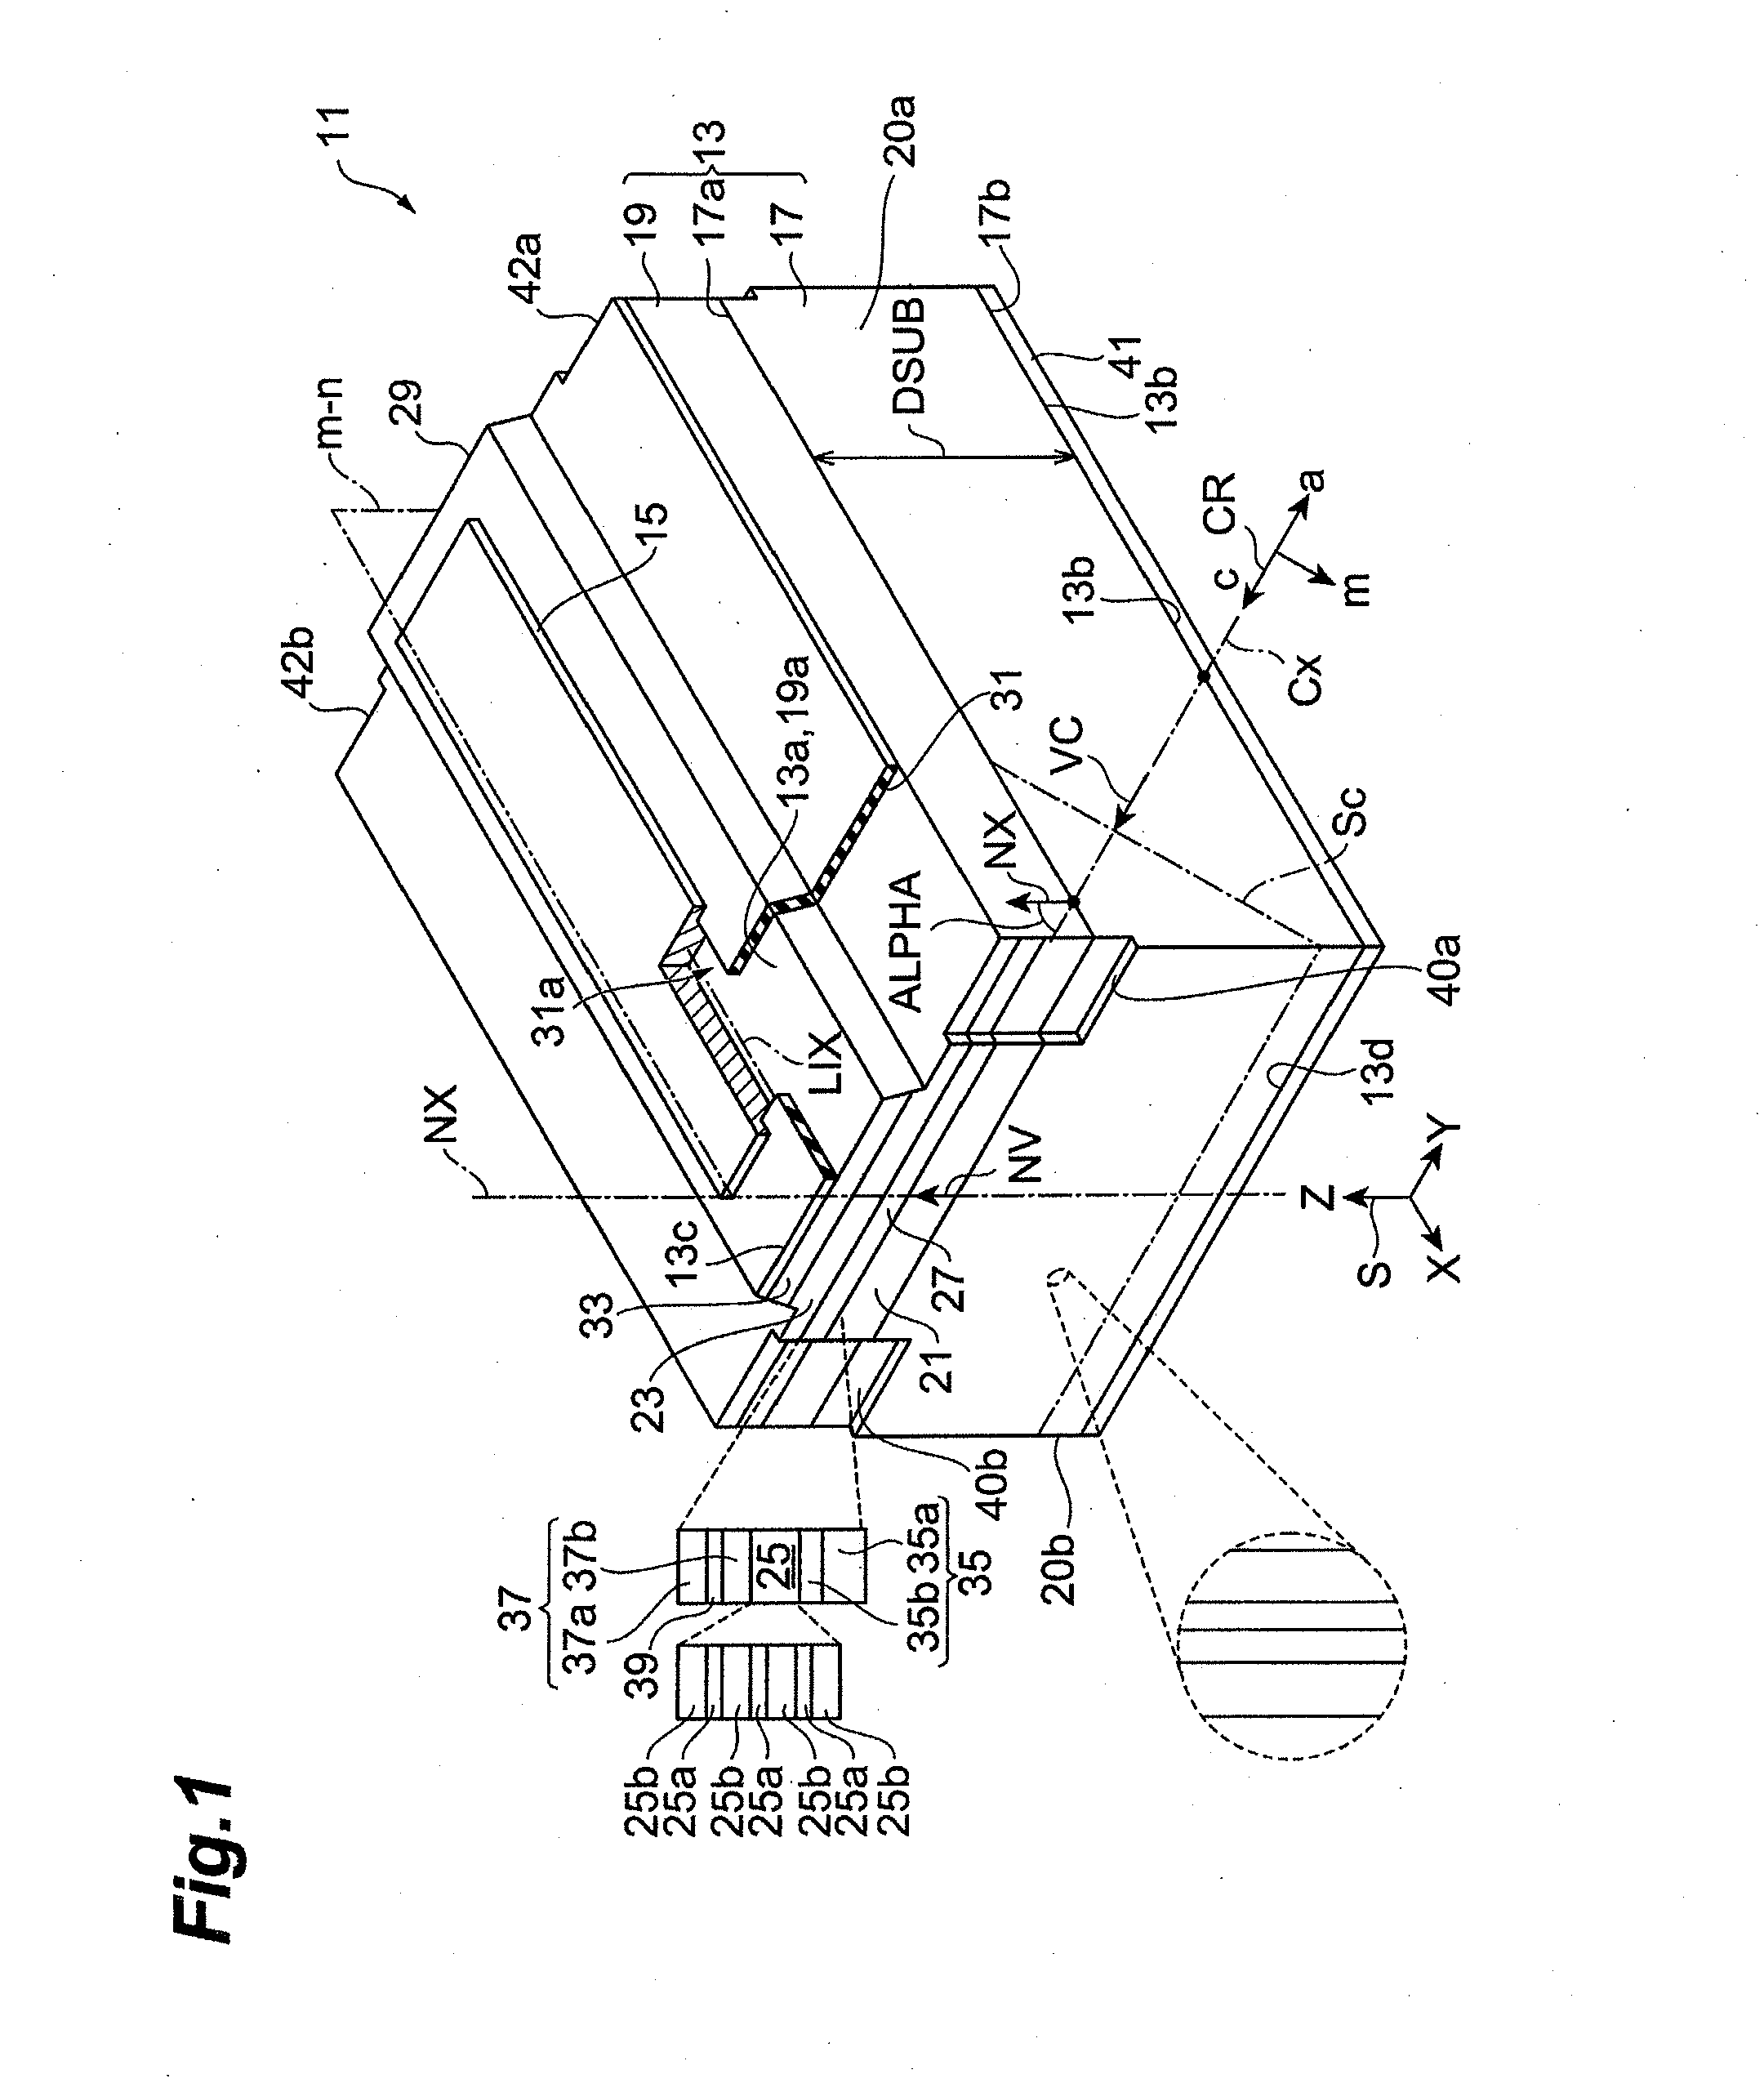 Group-iii nitride semiconductor laser device, and method for fabricating group-iii nitride semiconductor laser device